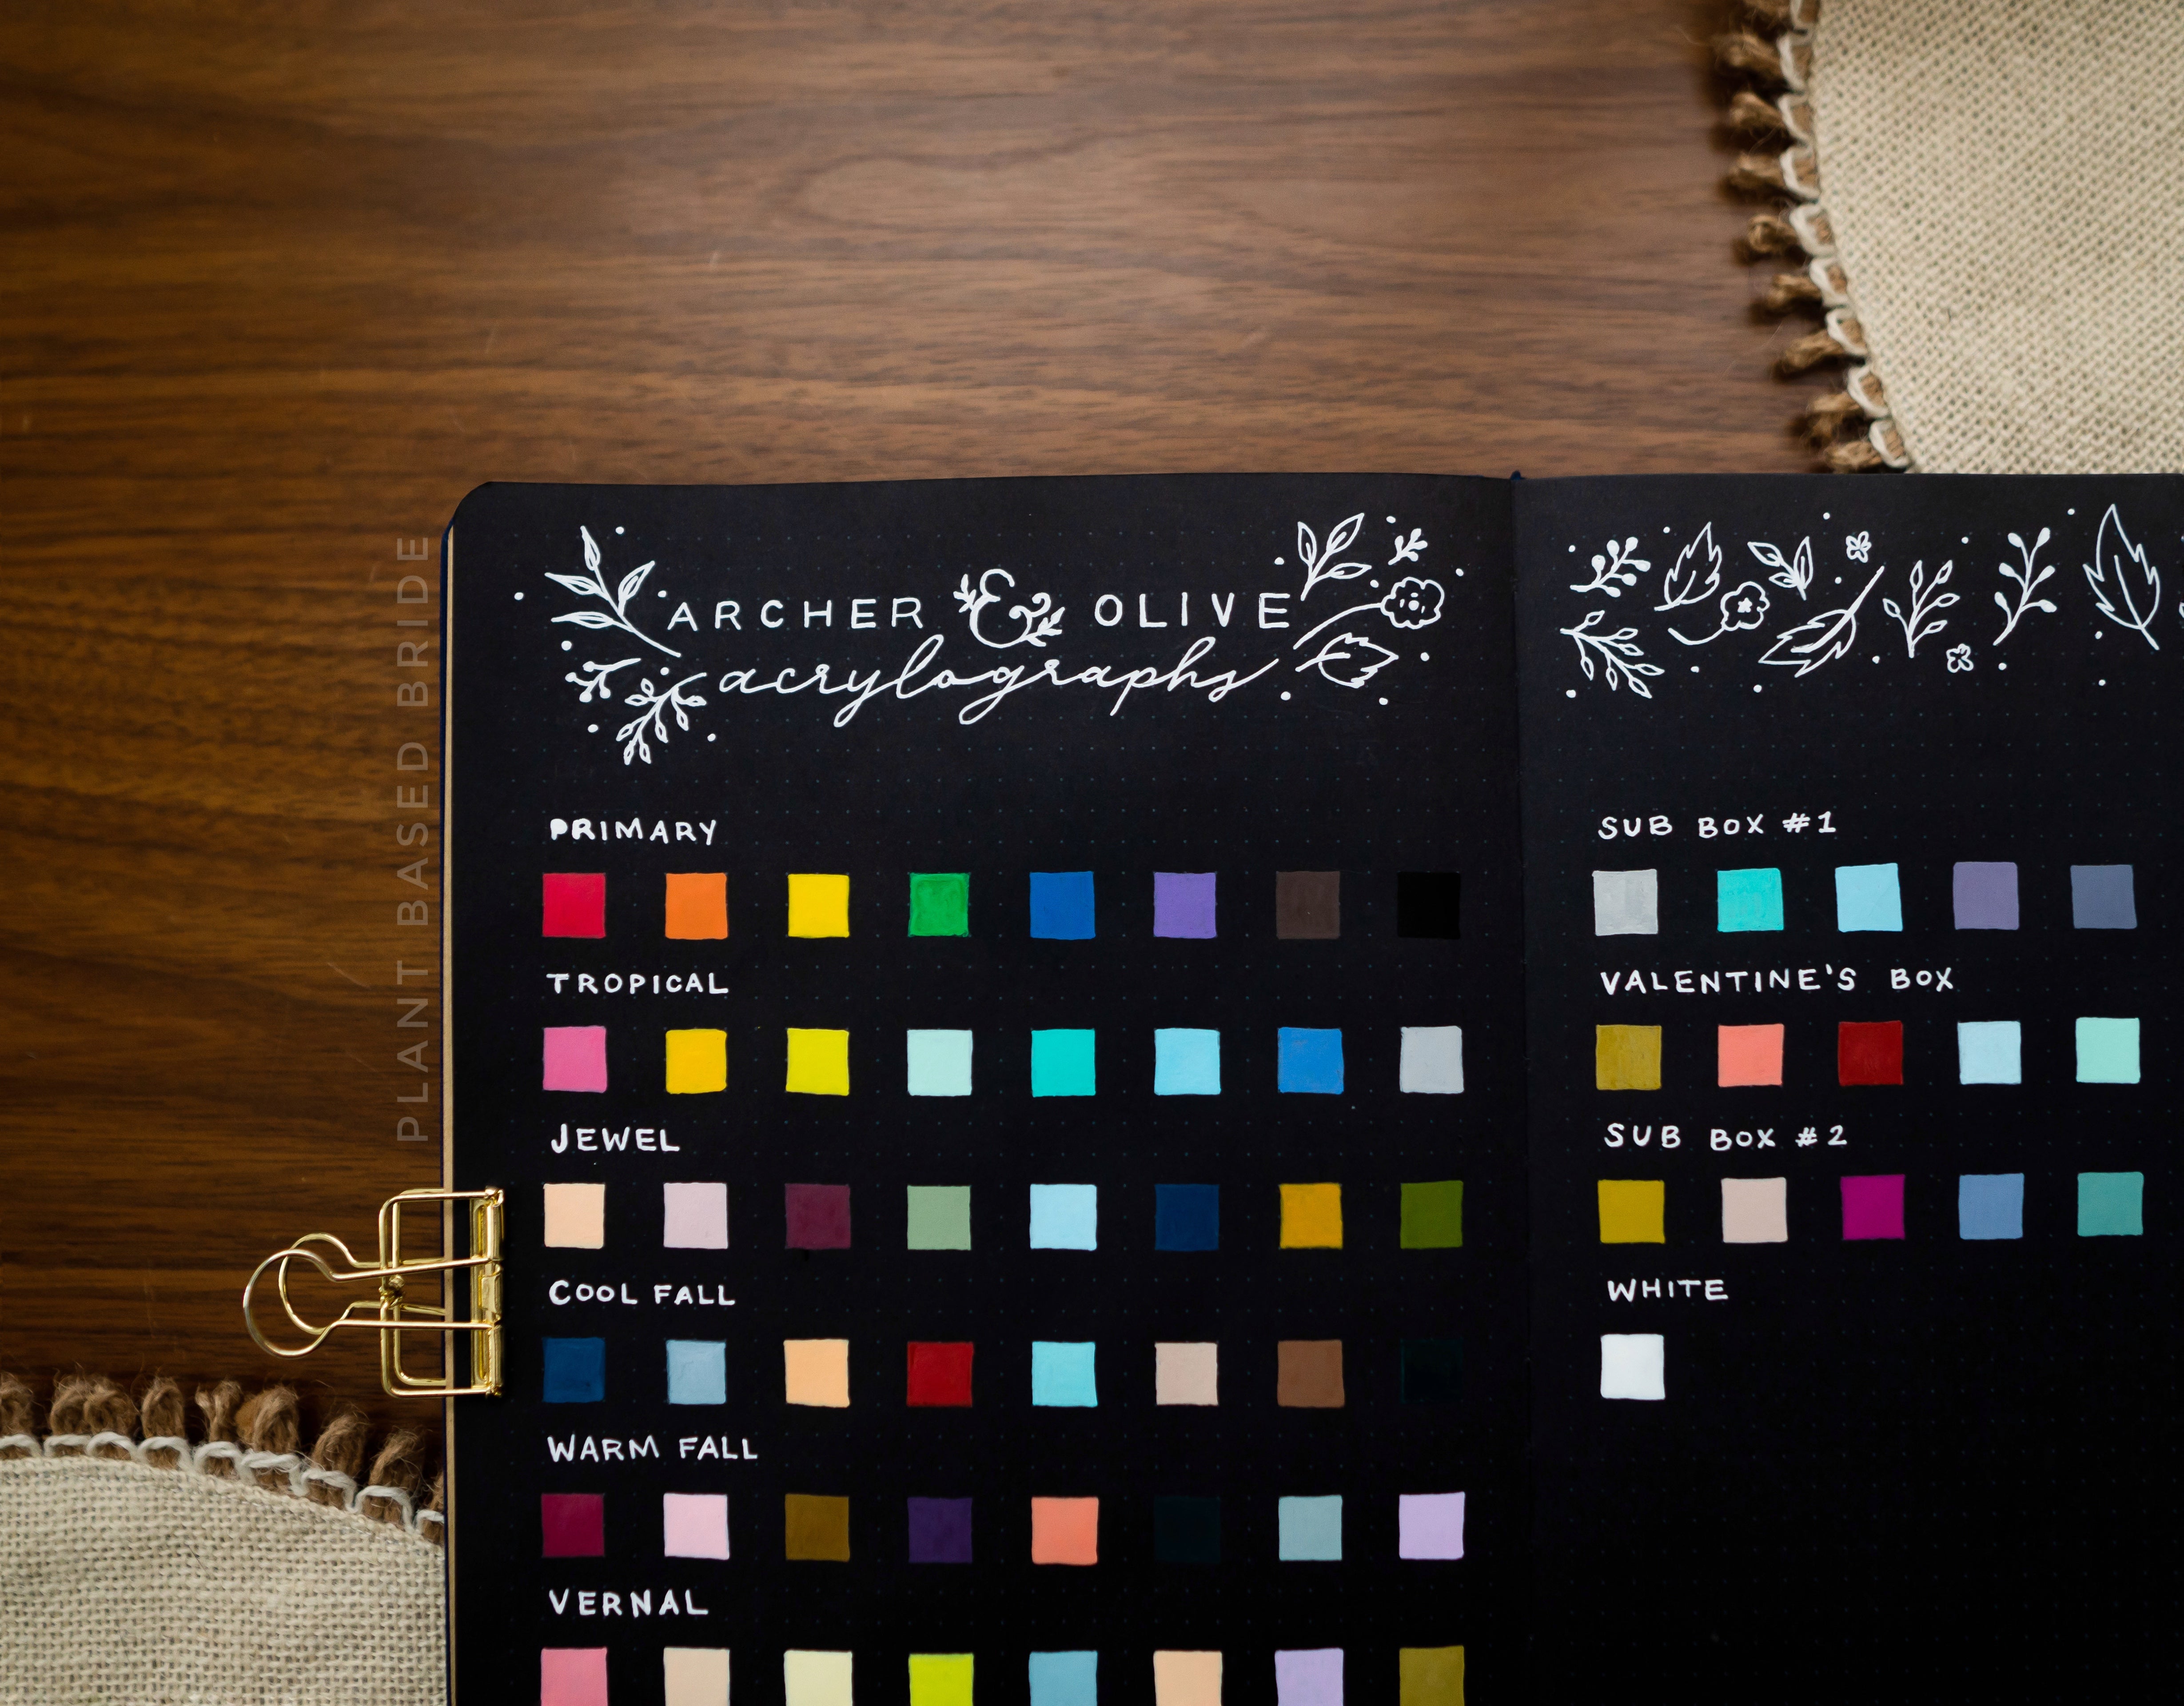 Archer & Olive Acrylograph Swatches Black Paper